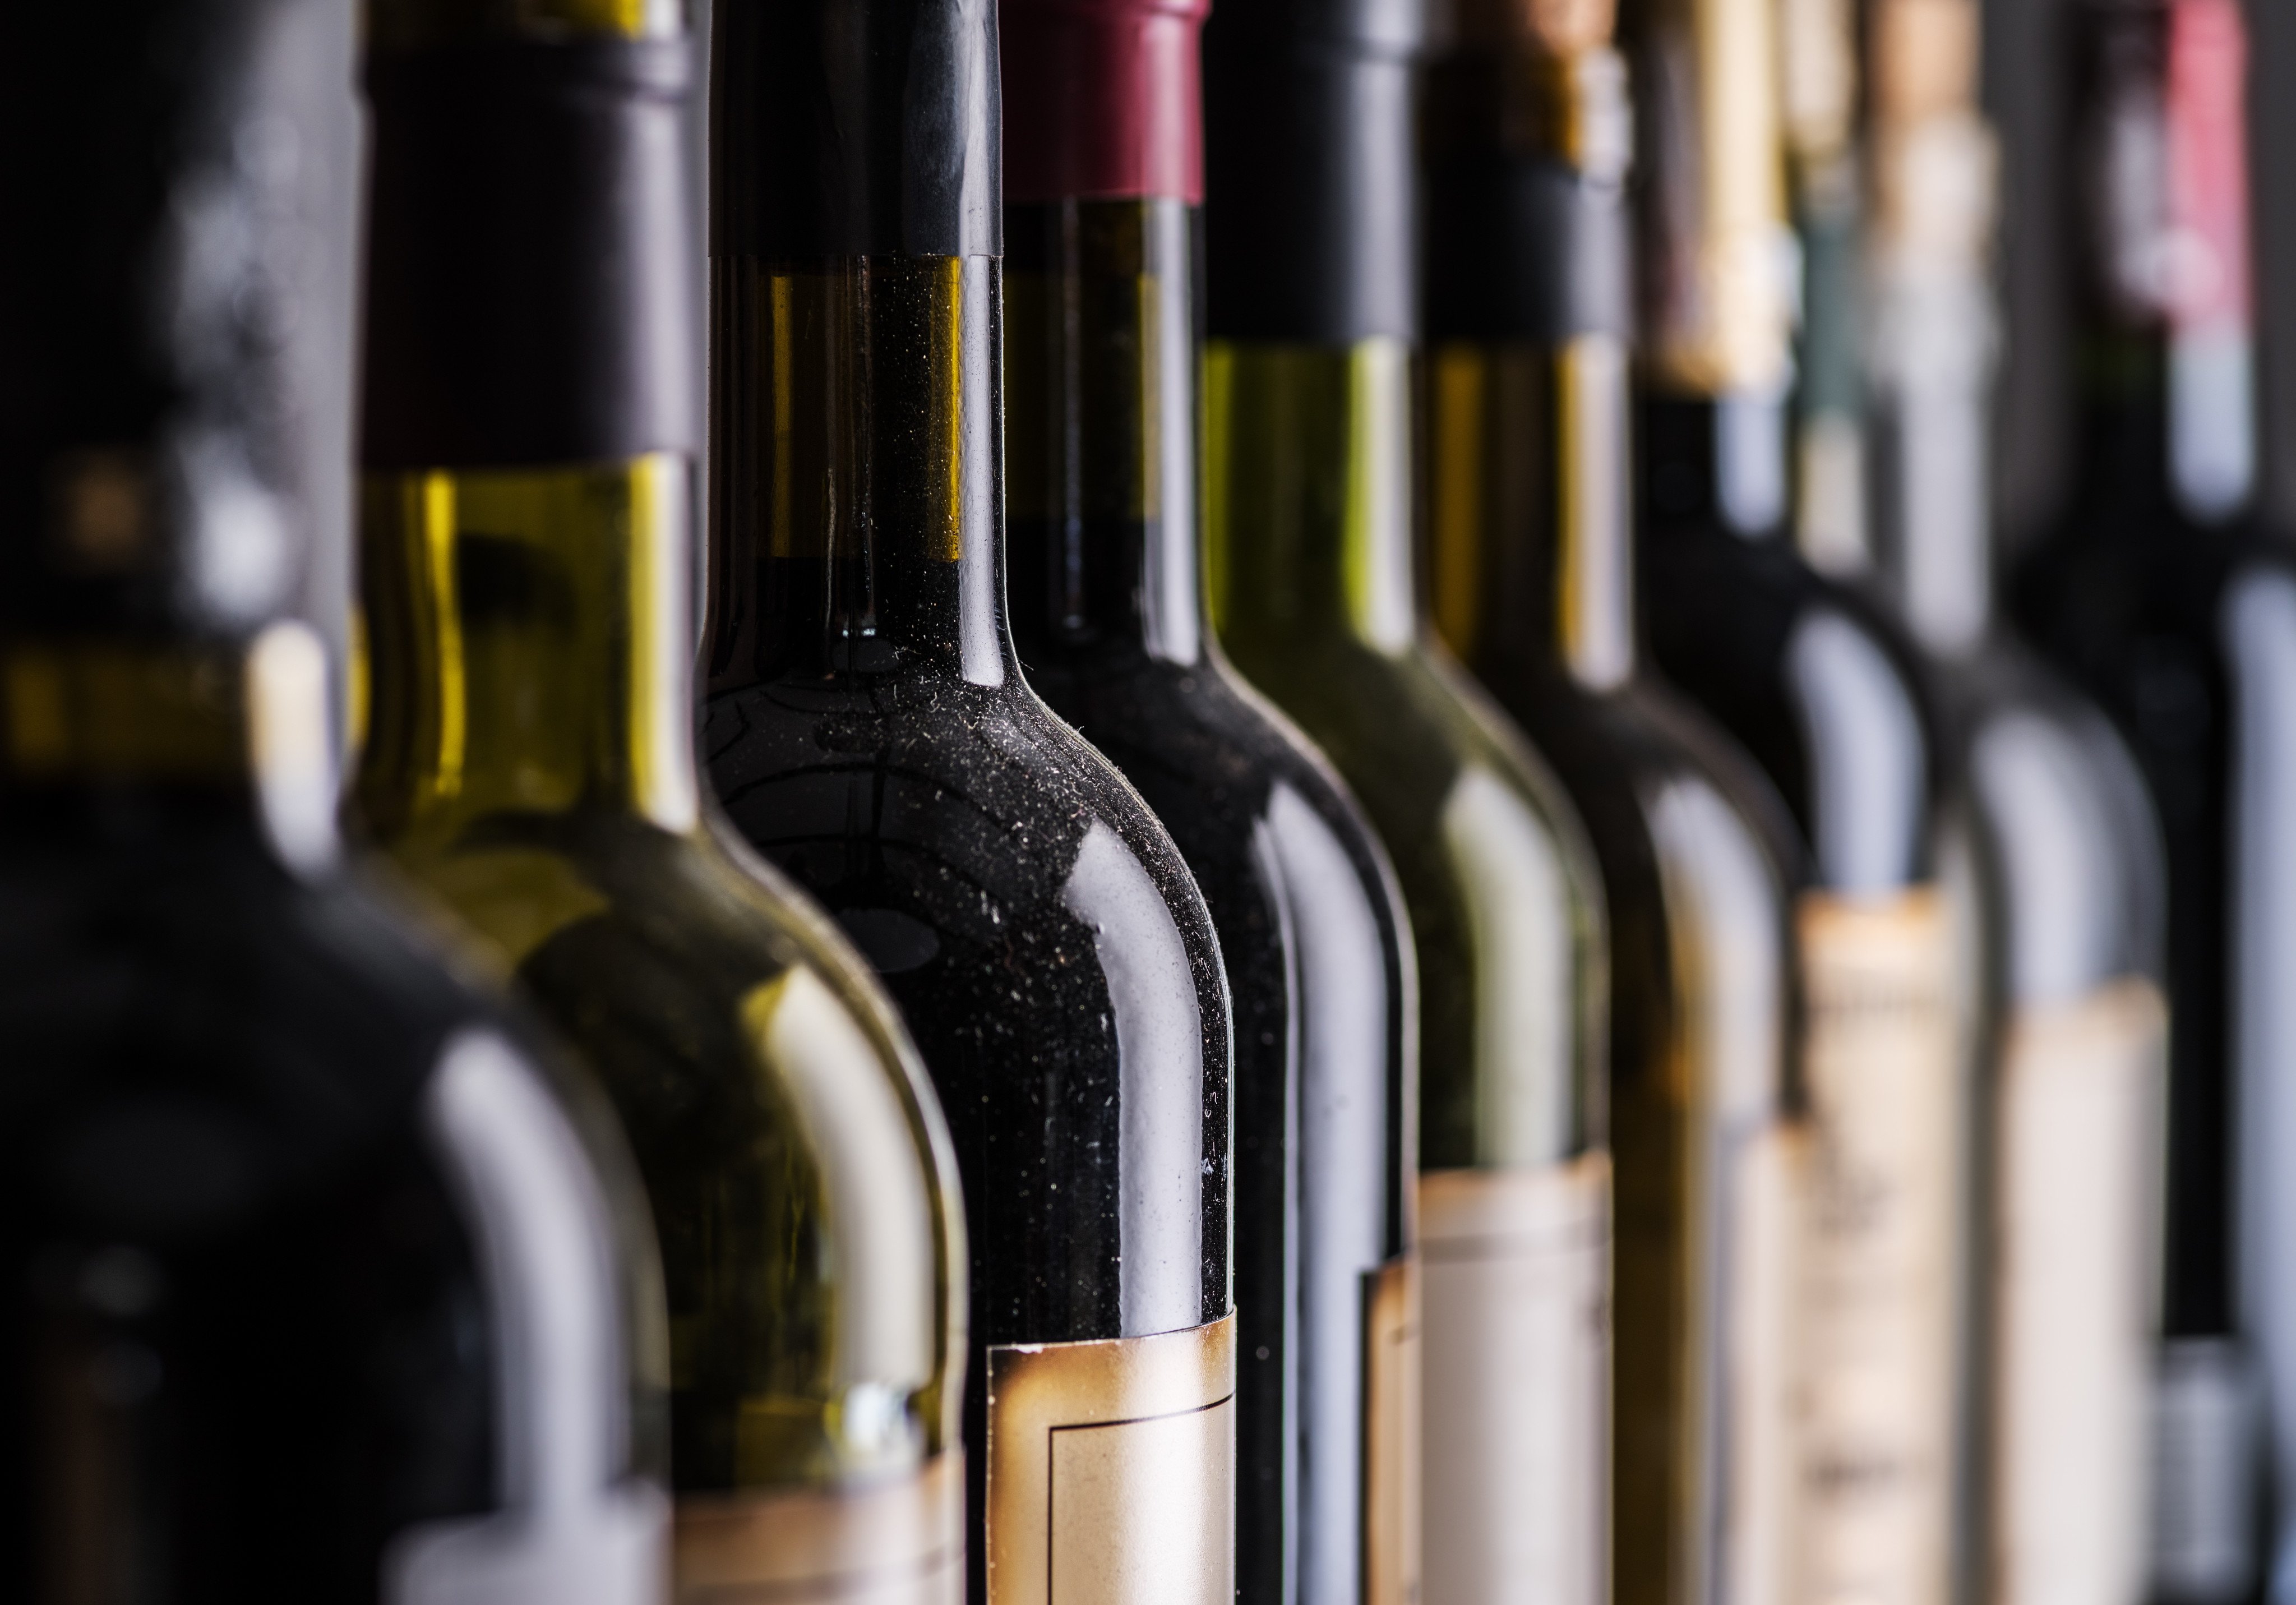 Some wine bottles were getting thicker and heavier from the 2000s on, causing wine expert Jancis Robinson to campaign against the practice, which accounts for a large part of wine’s carbon footprint. Photo: Shutterstock